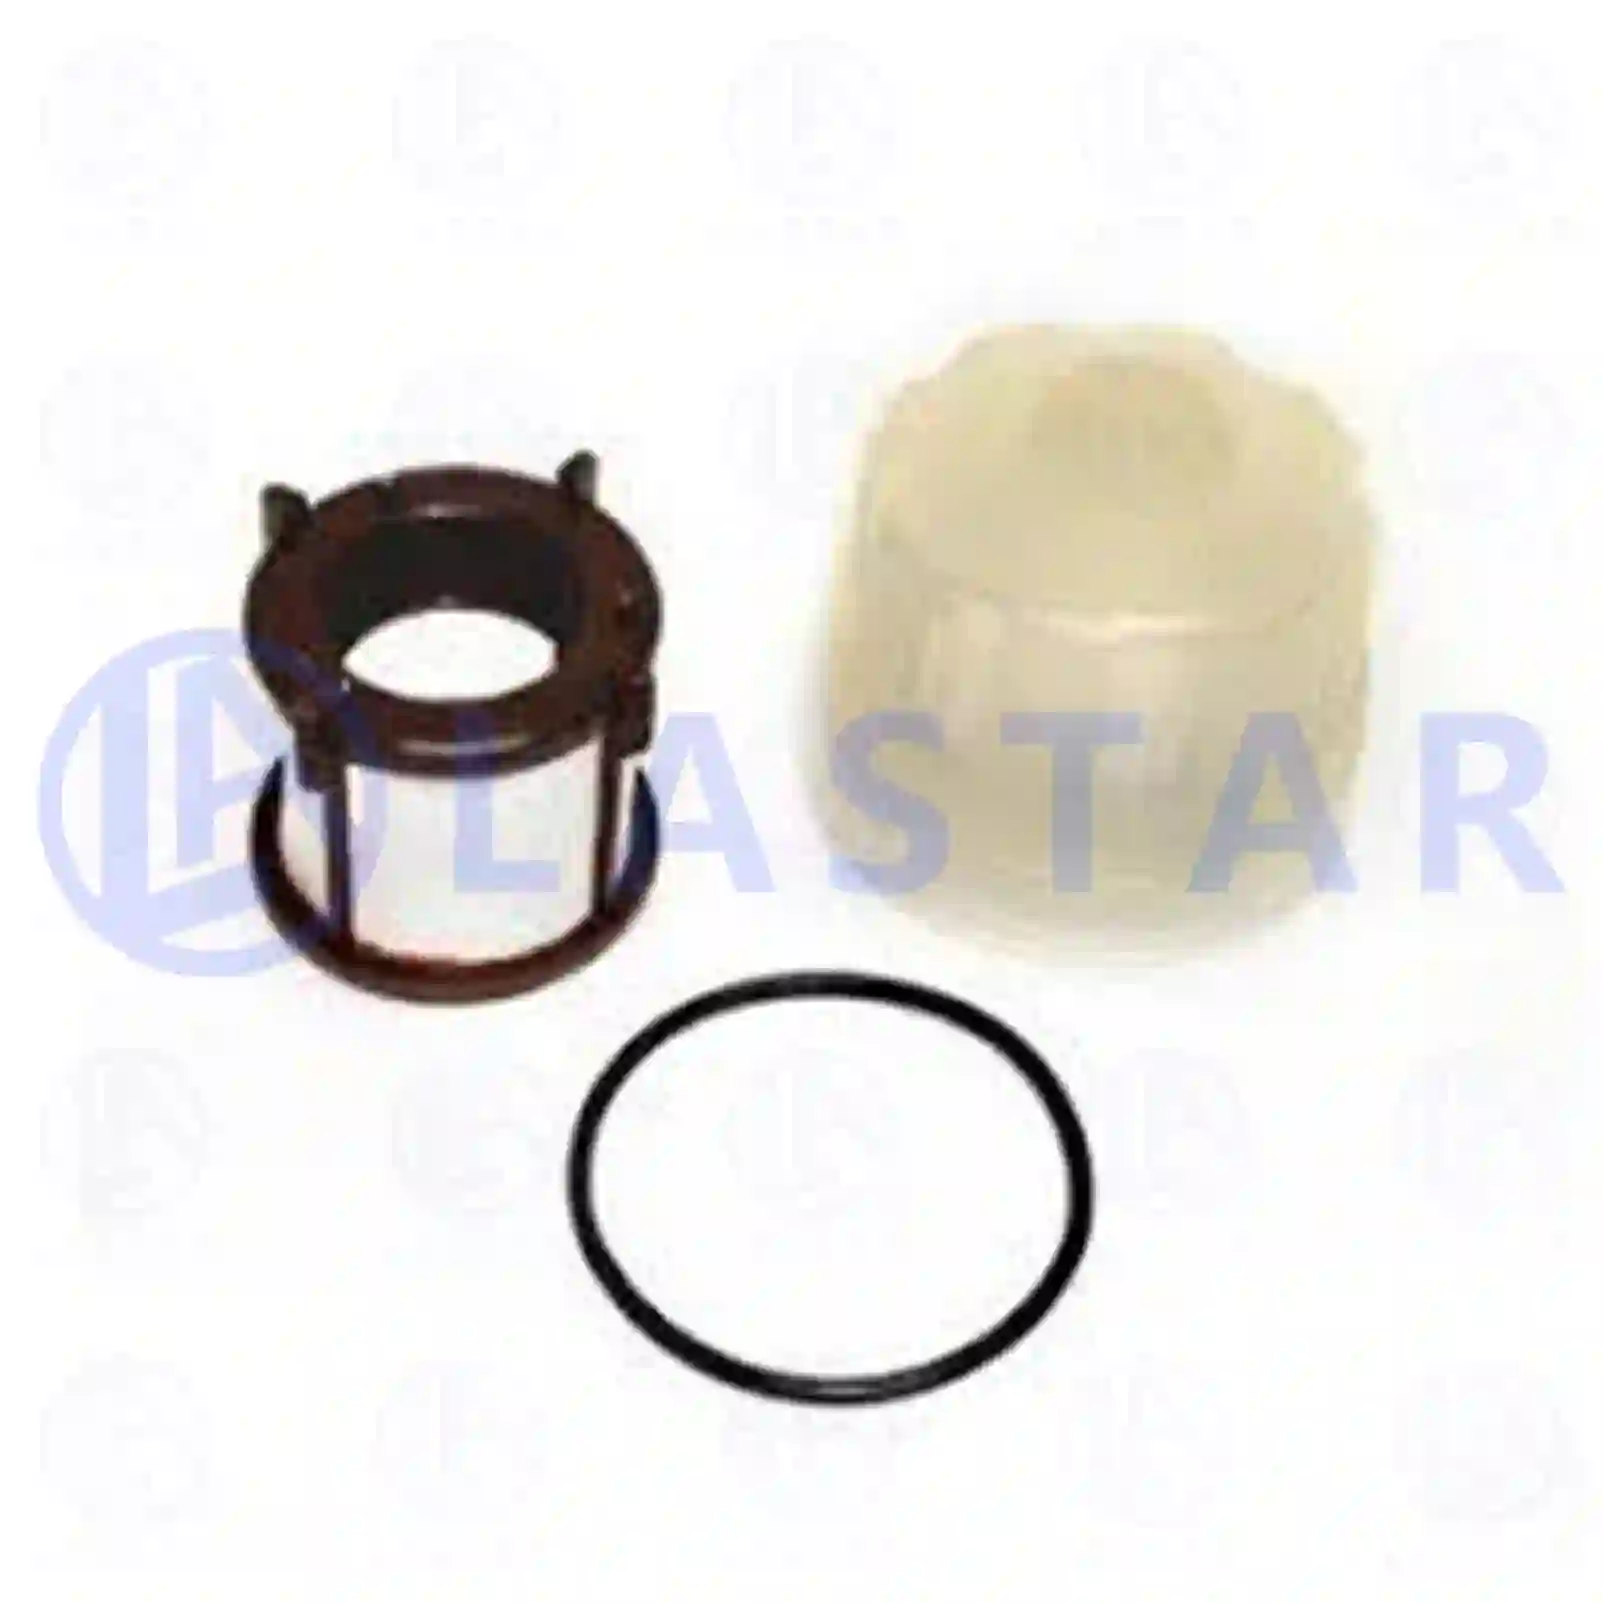  Filter repair kit, without filter housing || Lastar Spare Part | Truck Spare Parts, Auotomotive Spare Parts